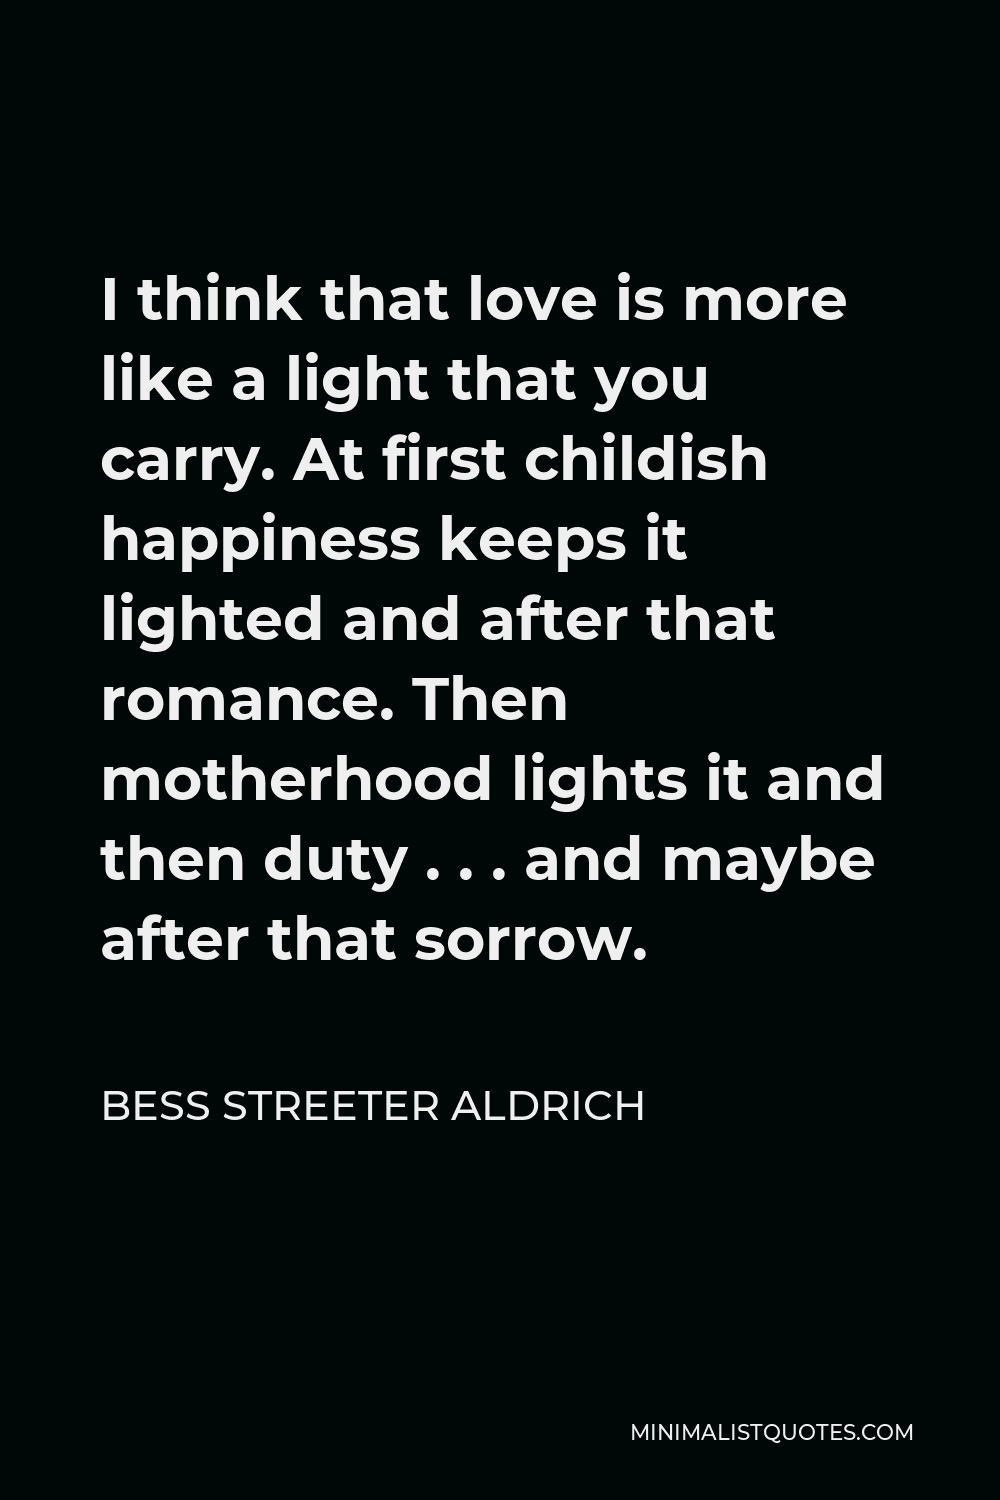 Bess Streeter Aldrich Quote - I think that love is more like a light that you carry. At first childish happiness keeps it lighted and after that romance. Then motherhood lights it and then duty . . . and maybe after that sorrow.